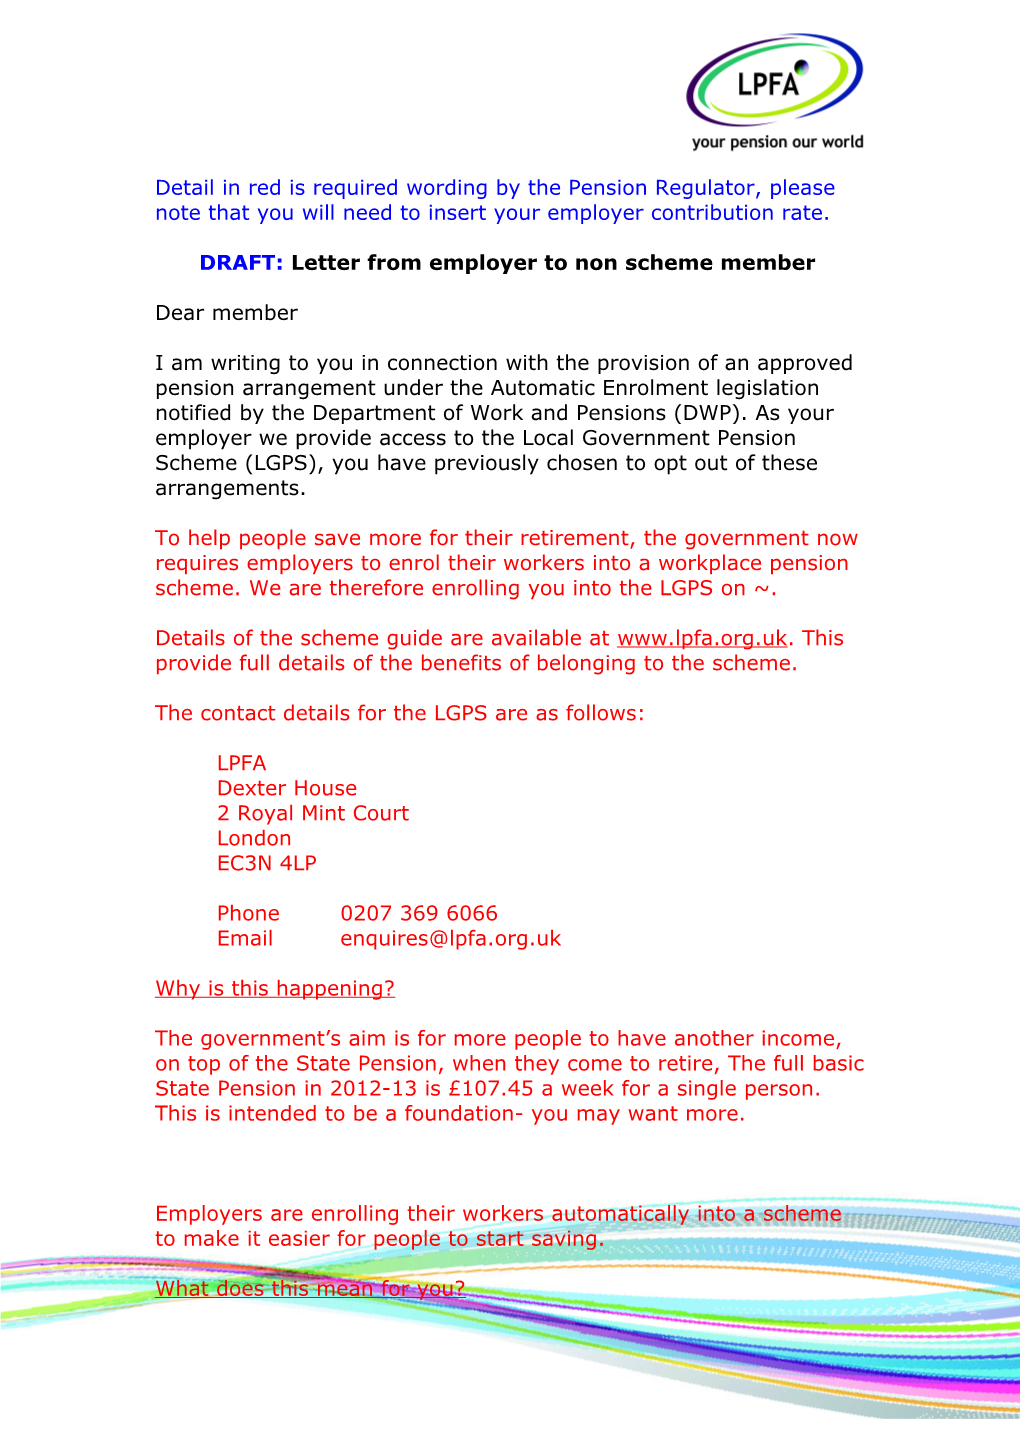 Letter from Employer to Non Scheme Member